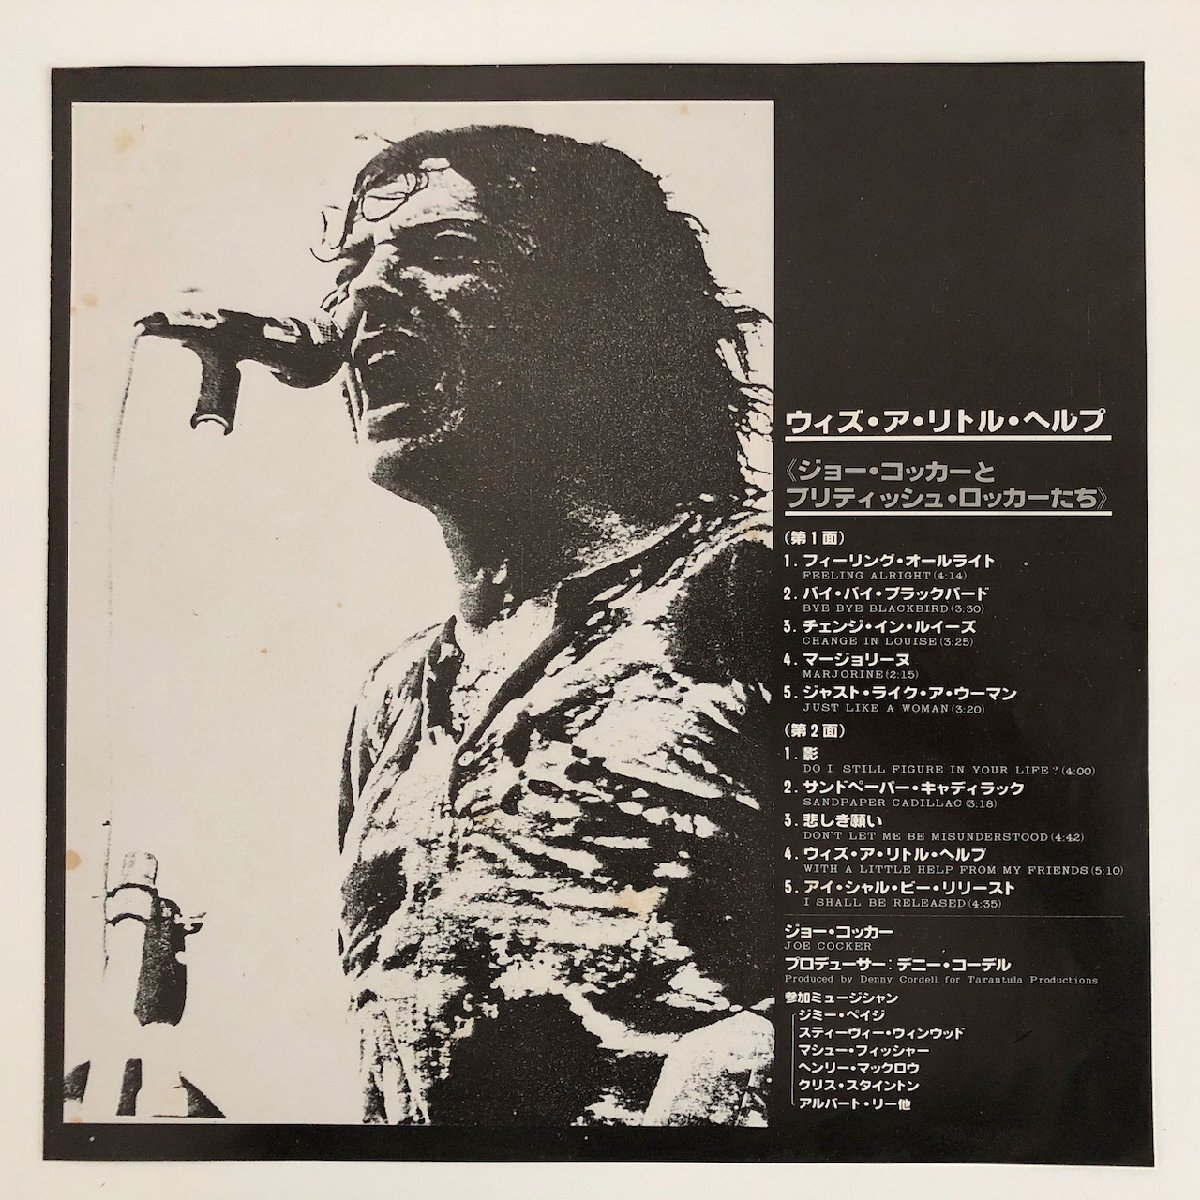 LP/ JOE COCKER / WITH A LITTLE HELP FROM MY FRIENDS / ジョー・コッカ― / 国内盤 ライナー A&M GXG-1024 40416の画像3